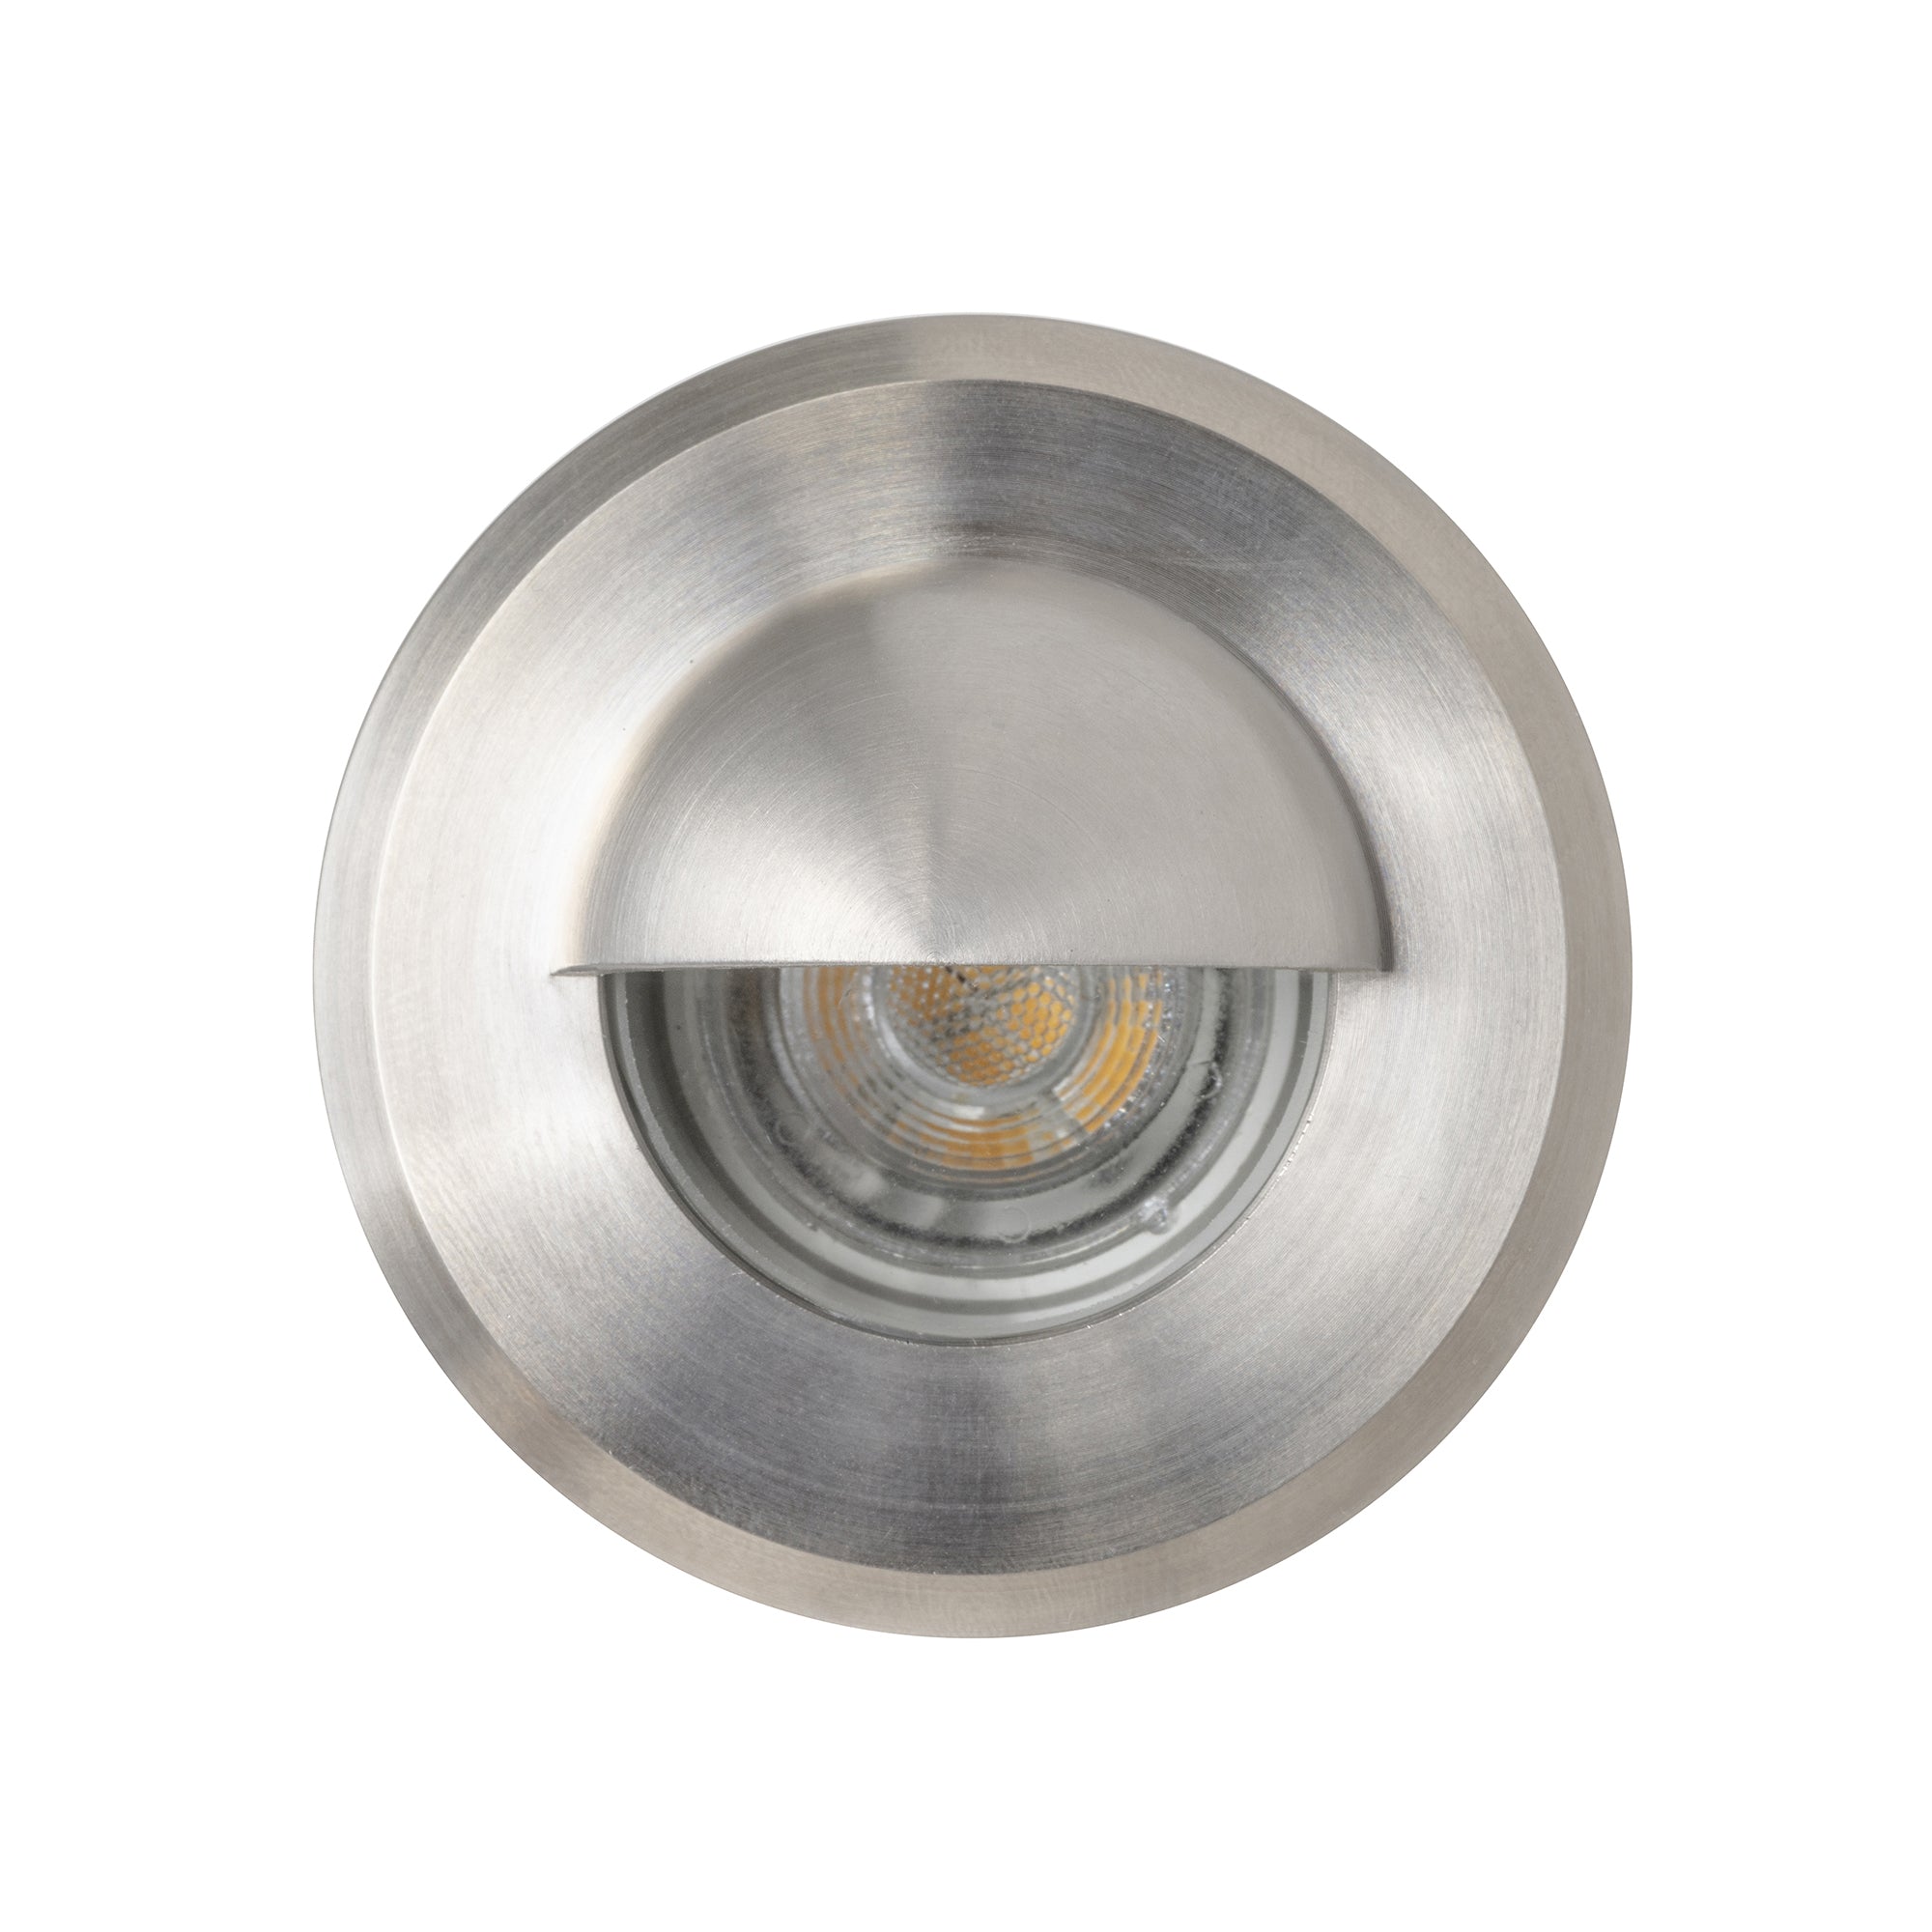 HV2899NW-SS316 -  Lokk 316 Stainless Steel LED Wall Light with Eyelid